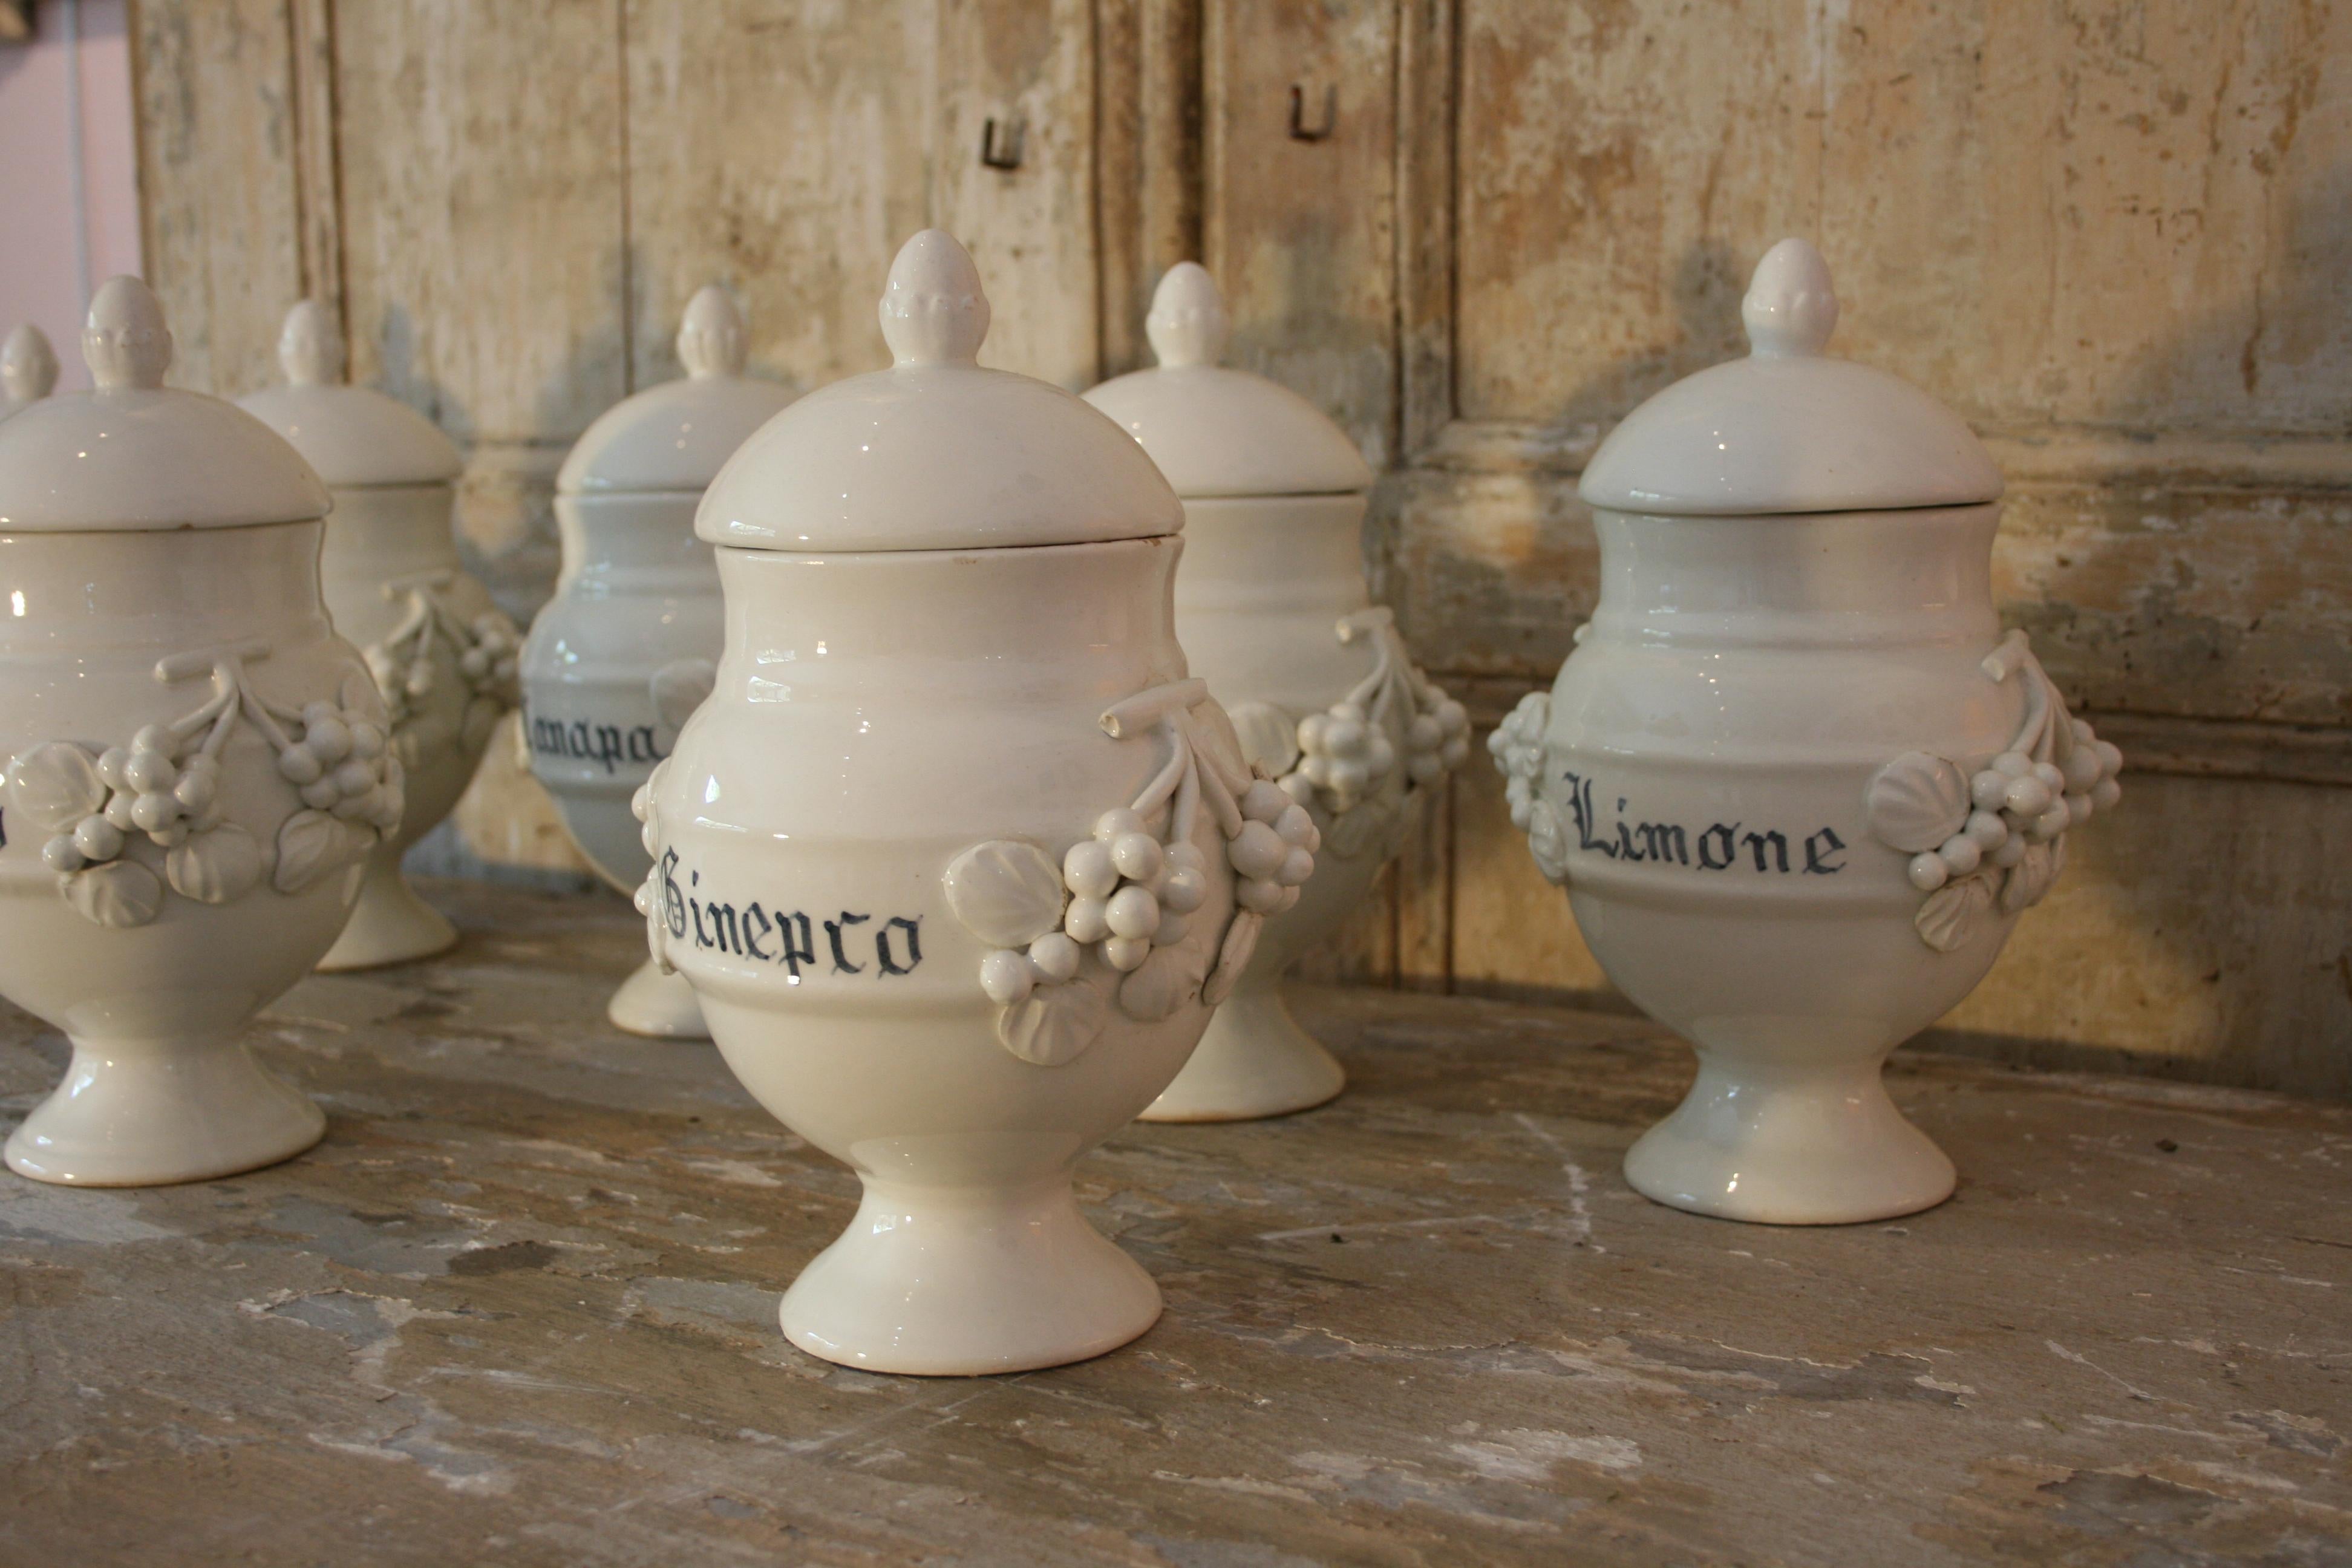 Fantastic set of 8 19th century Italian apothecary or pharmacy jars in near perfect condition. Beautiful rounded shape with lids, embossed fruits applications on glazed earthenware & delicate blue script, stamped to the underneath with M and a